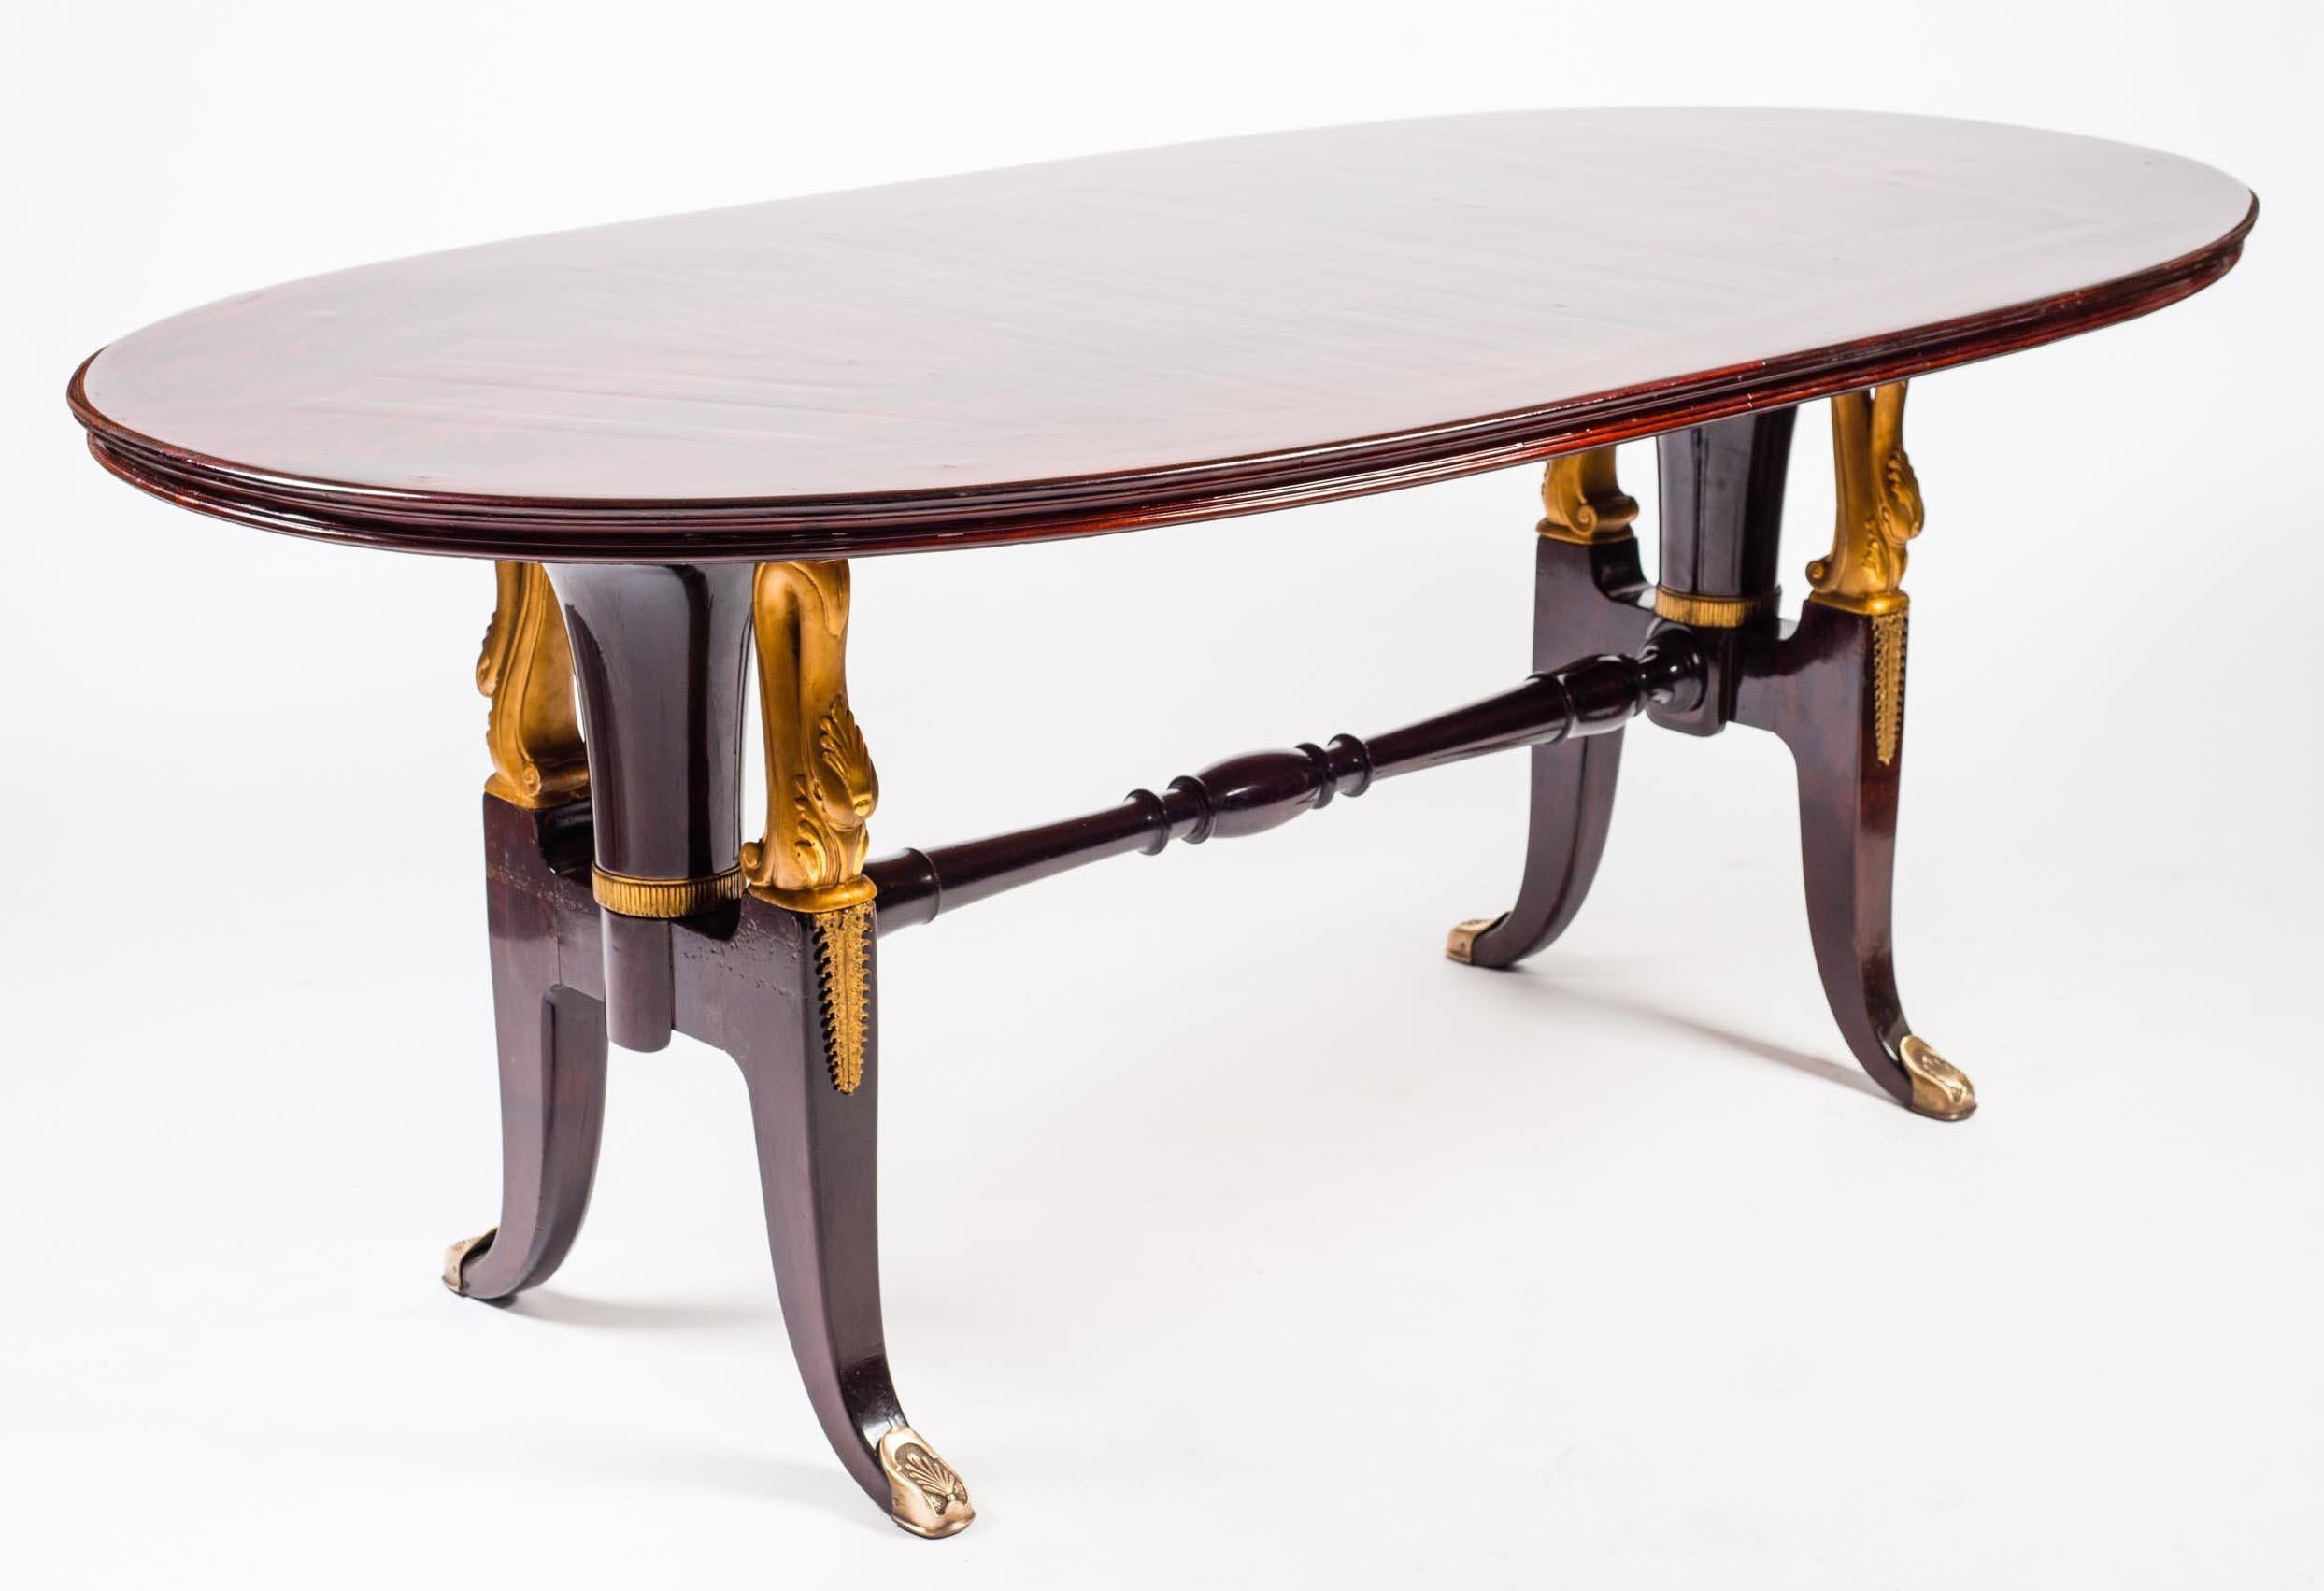 Midcentury Italian Mahogany Table in the Style of Paolo Buffa, 1950s For Sale 6